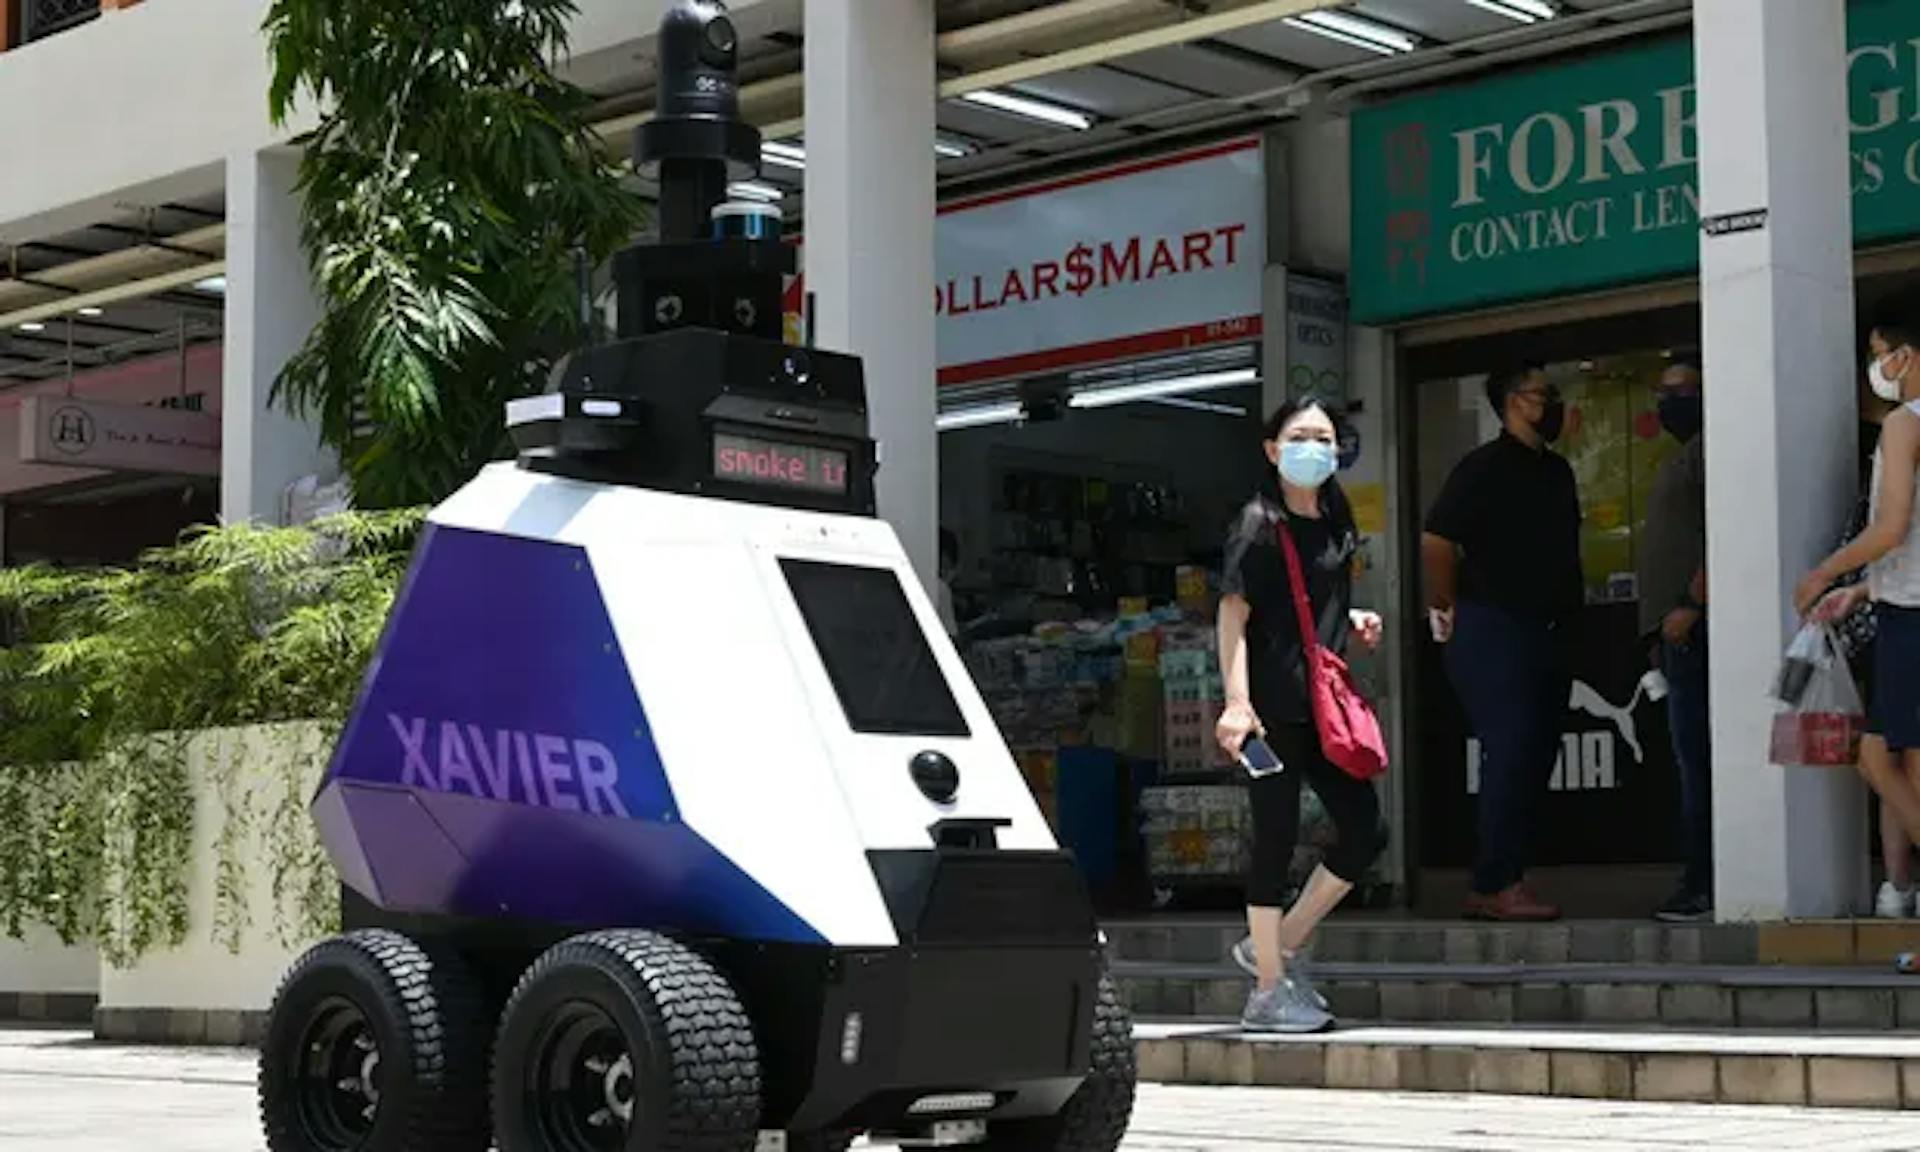 Autonomous "Xavier", developed by the Home Team Science and Technology Agency (HTX) on its 3-week trial run in Singapore. // The Guardian